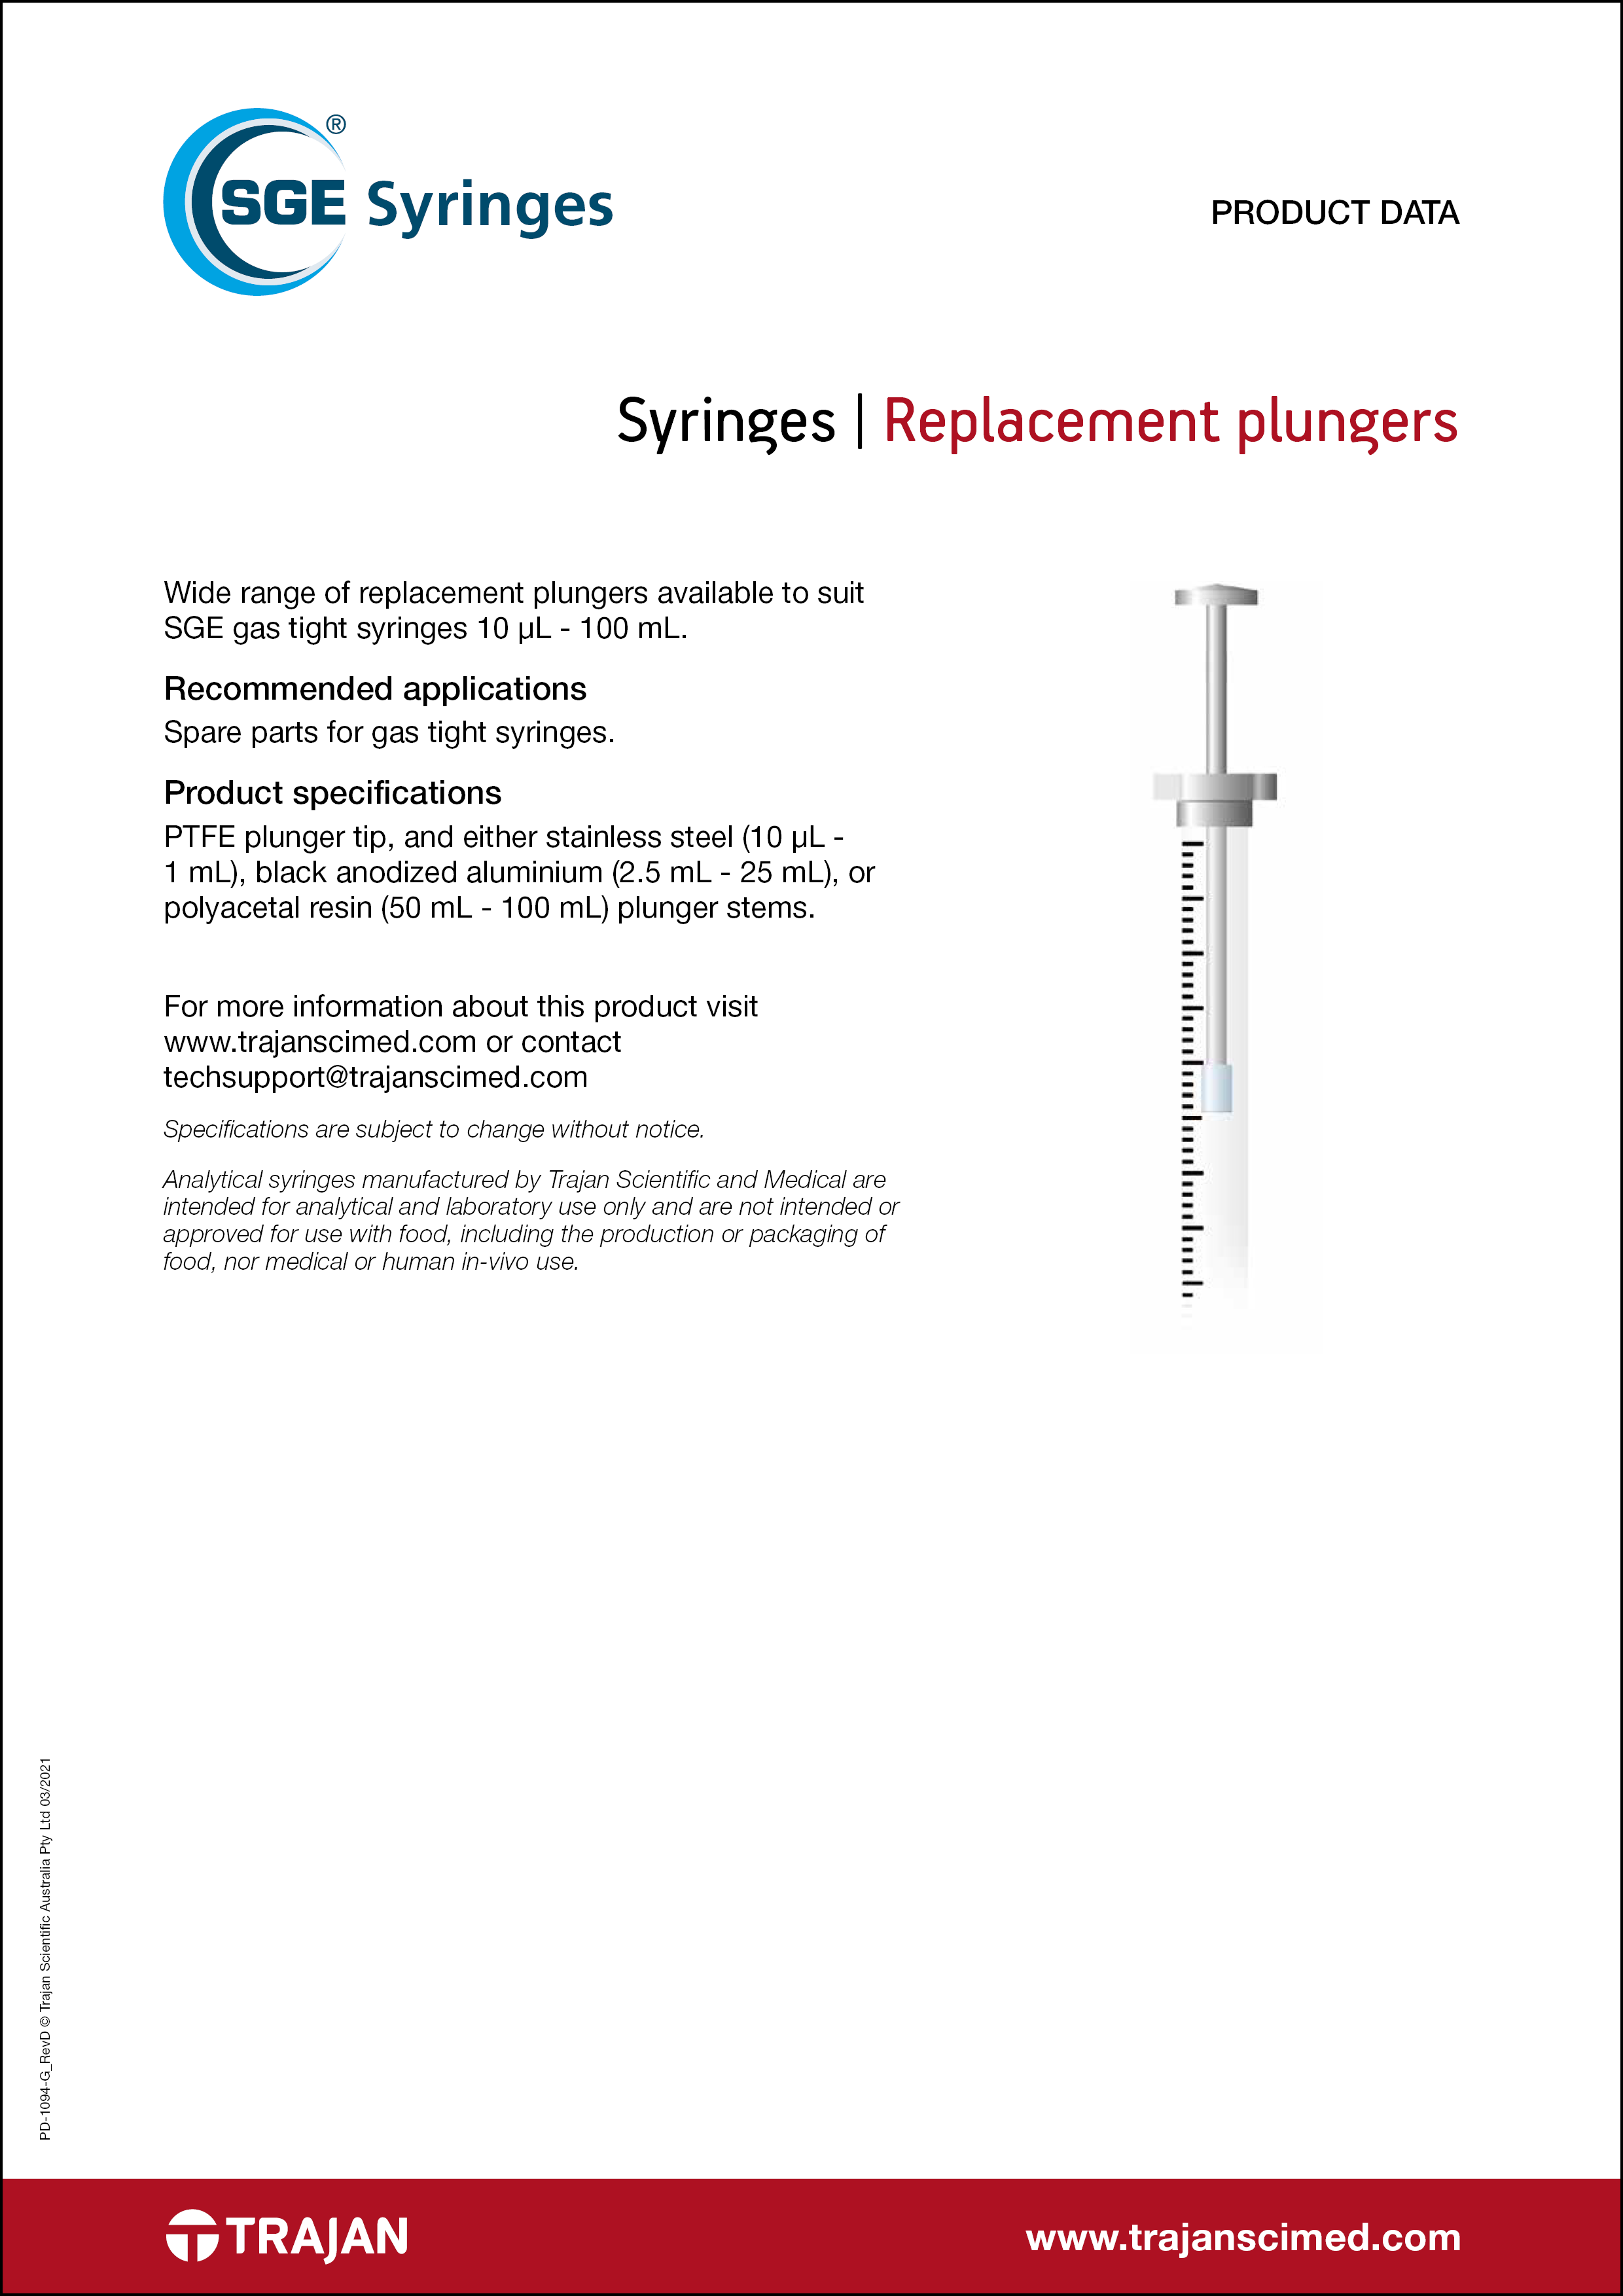 Product Data Sheet - Replacement plungers